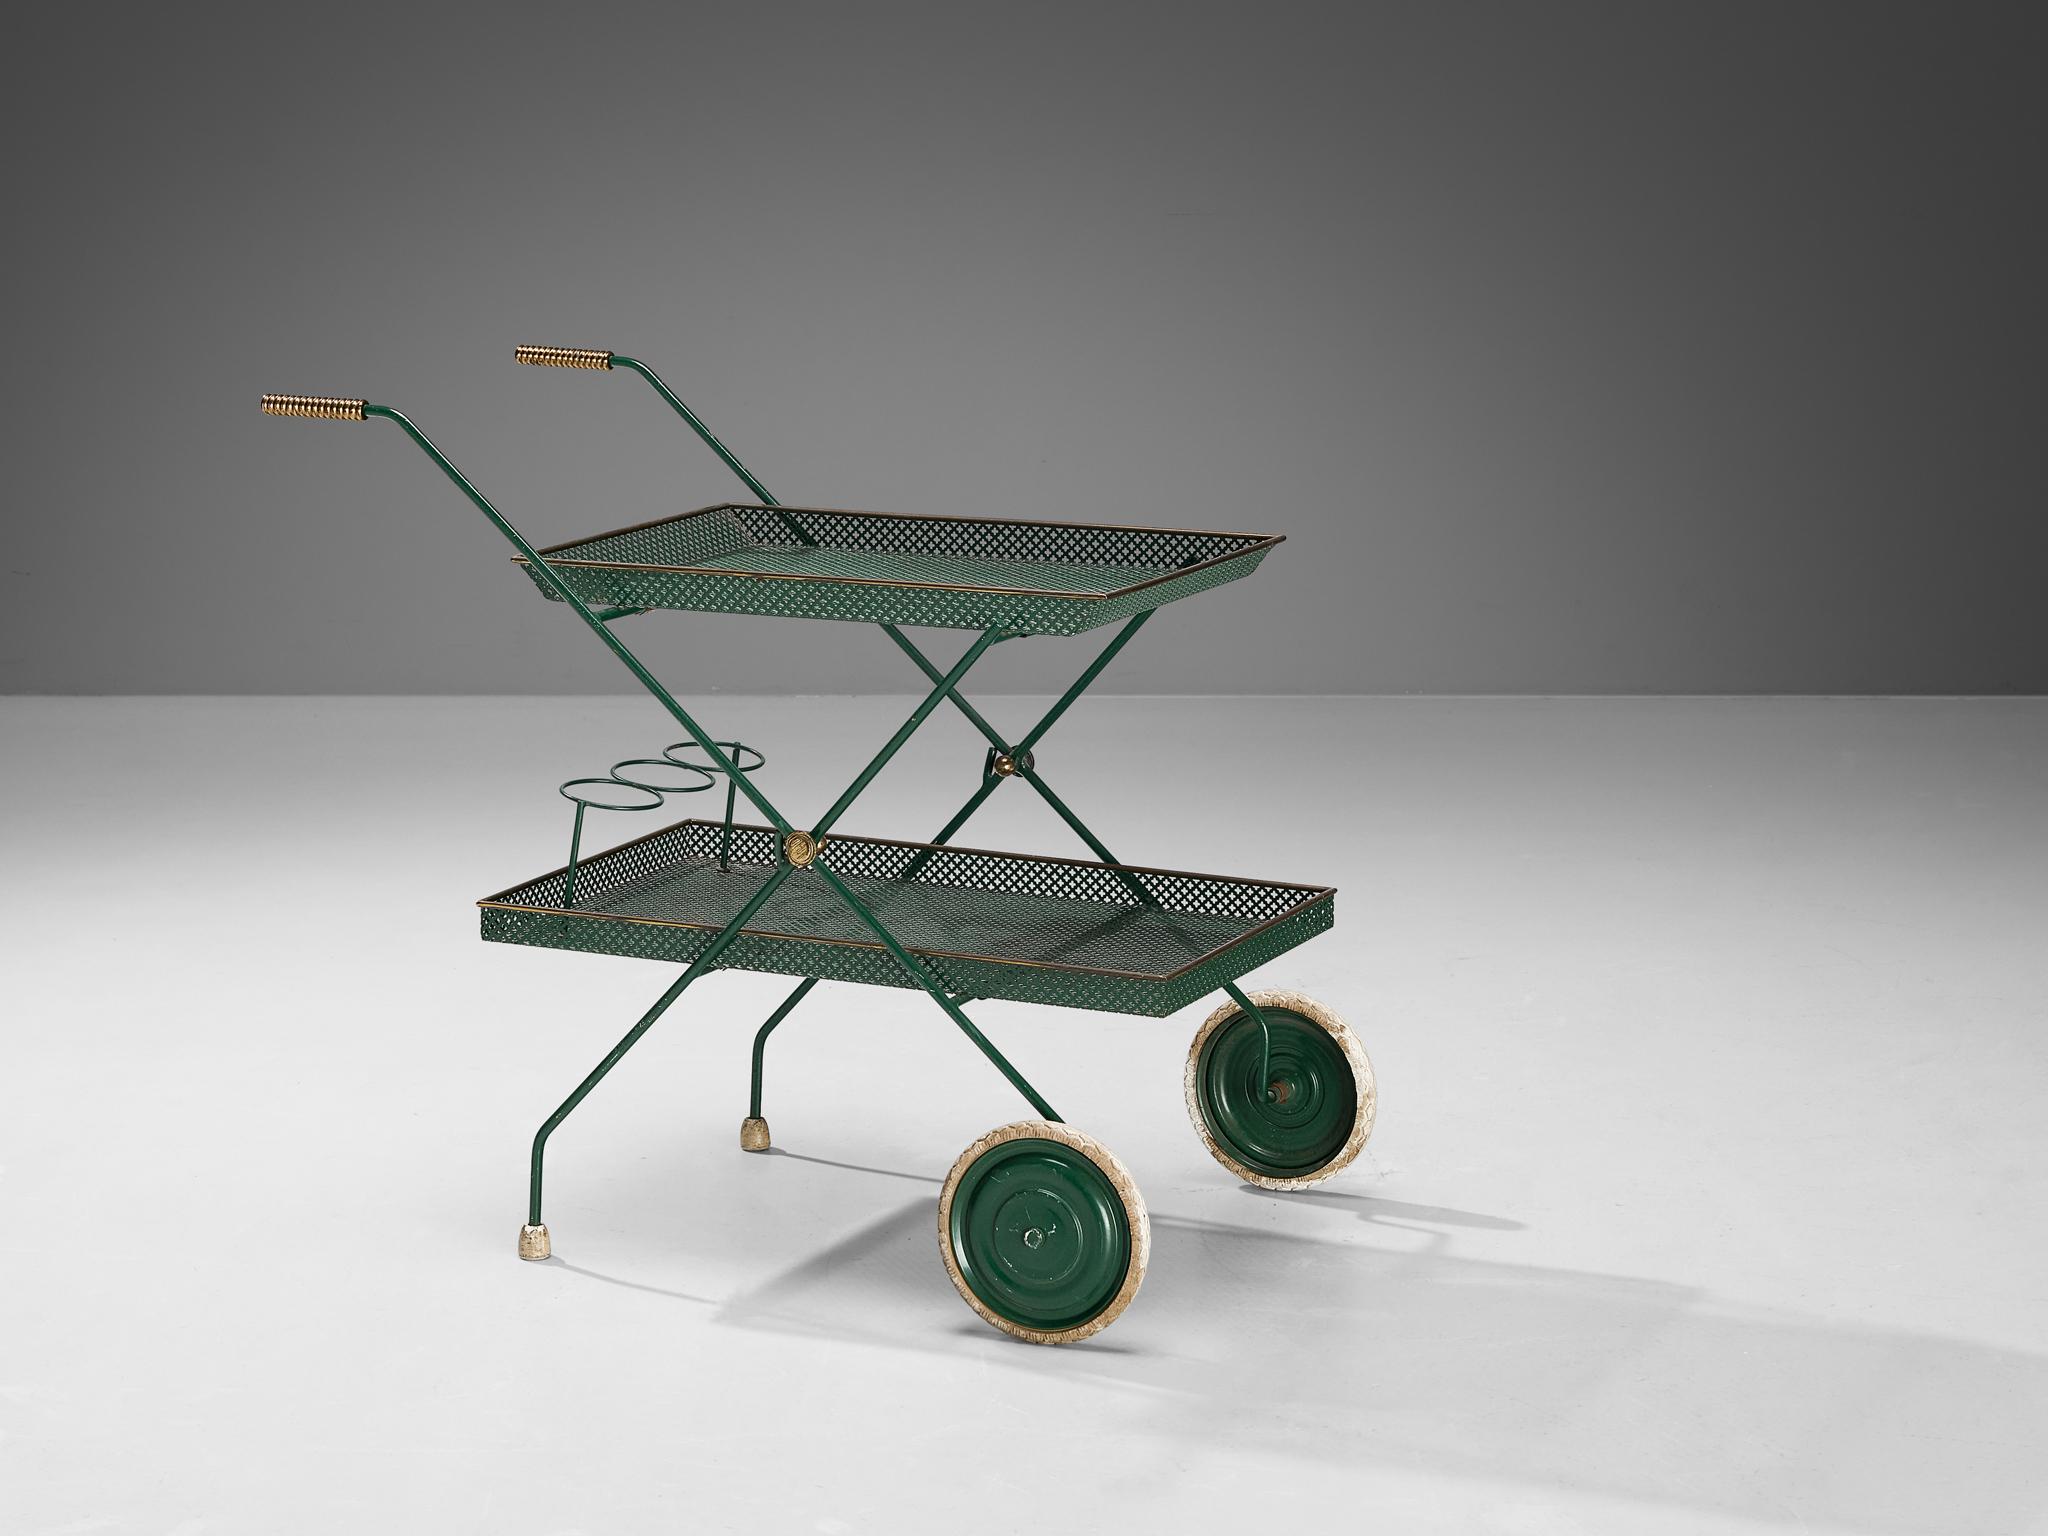 Svenskt Tenn, bar cart or serving trolley, brass, lacquered metal, Sweden, 1950s

Practical and modern bar cart by Swedish manufacturer Svenskt Tenn, made in the 1950s. This design is made out of green lacquered perforated metal and has elegant